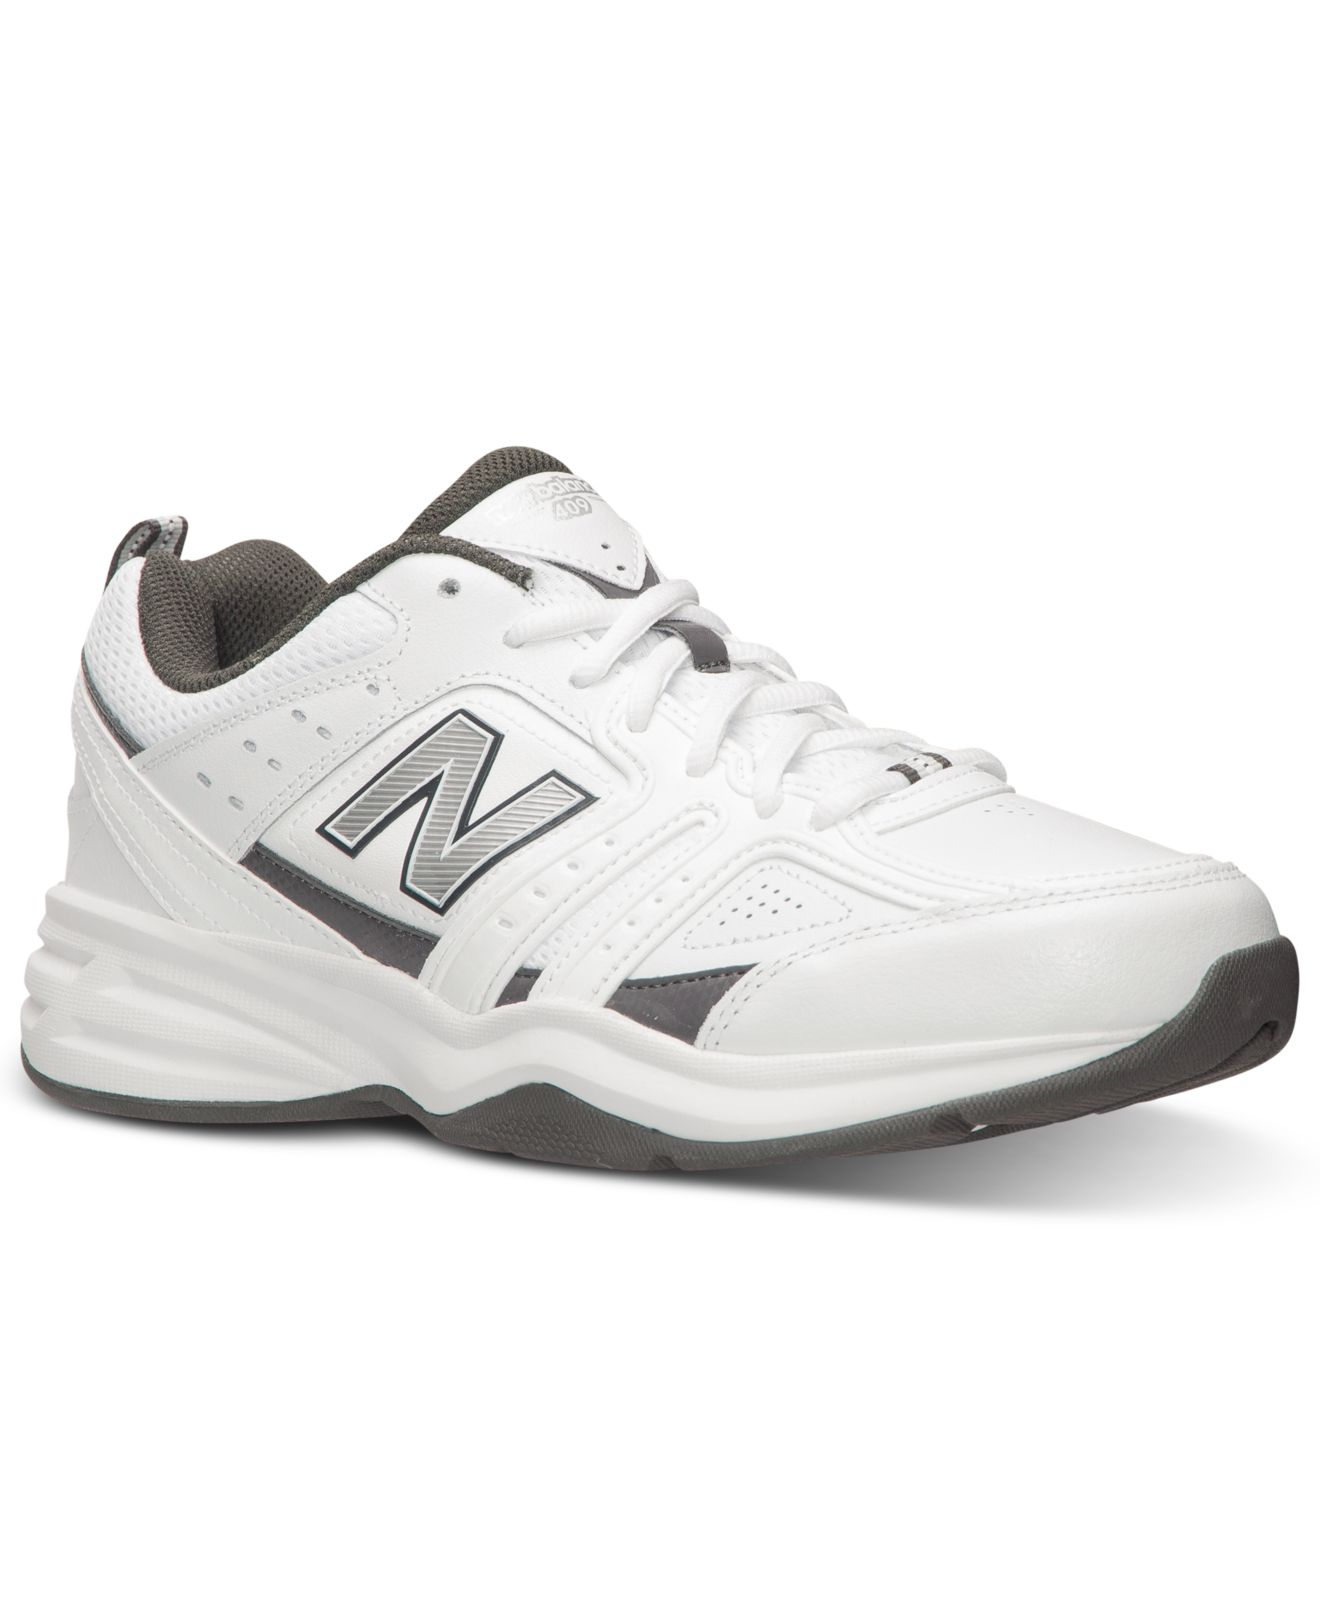 Lyst - New Balance Men's Mx409 Training Sneakers From Finish Line in ...